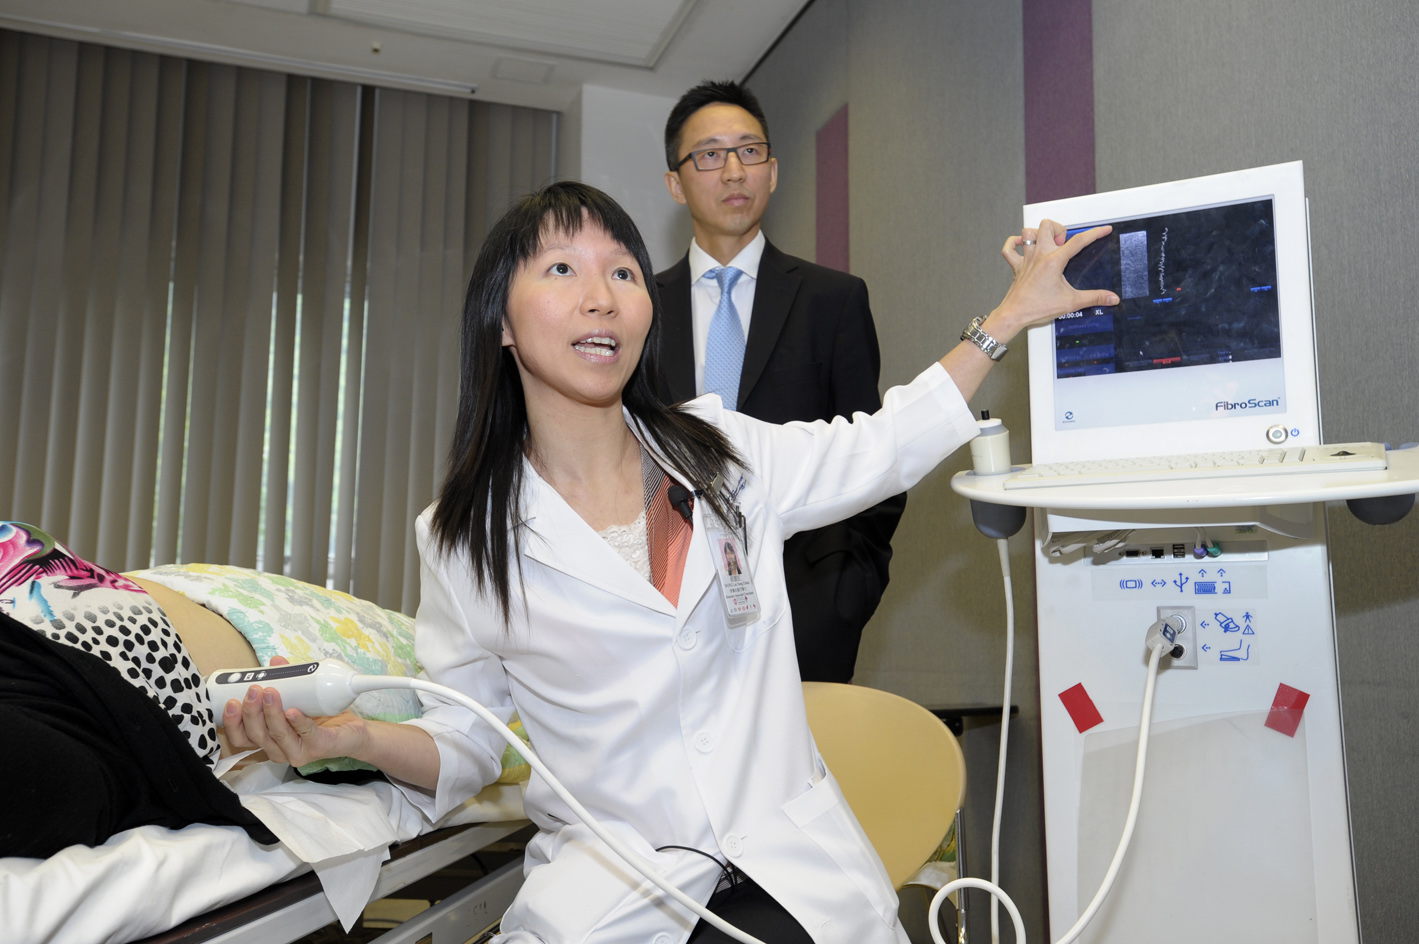 Prof. Wong Lai Hung Grace demonstrates the difference imaging results made by the new XL probe and the M probe of Fibroscan on an obese patient